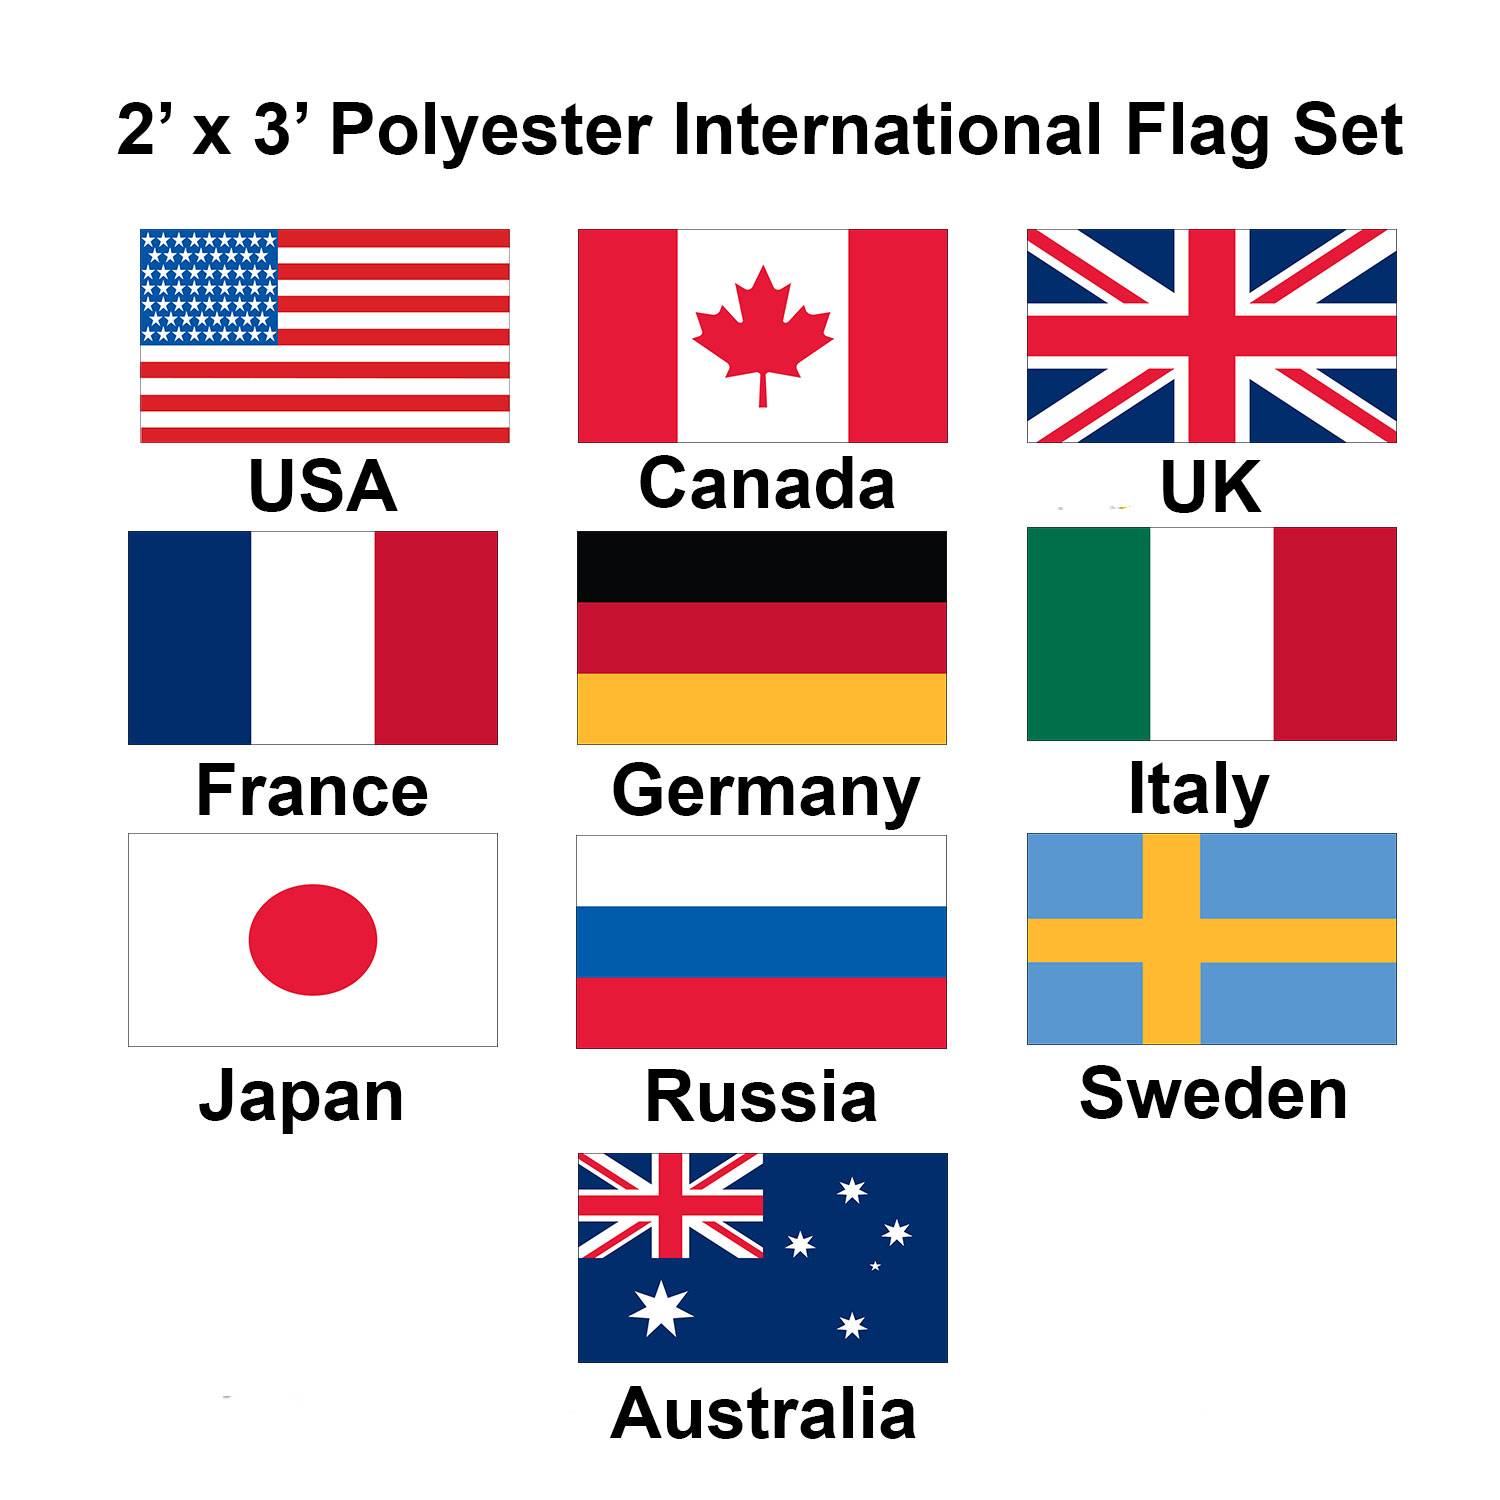 Shop International Flags For sale indoor and outdoor for schools churches and businesses